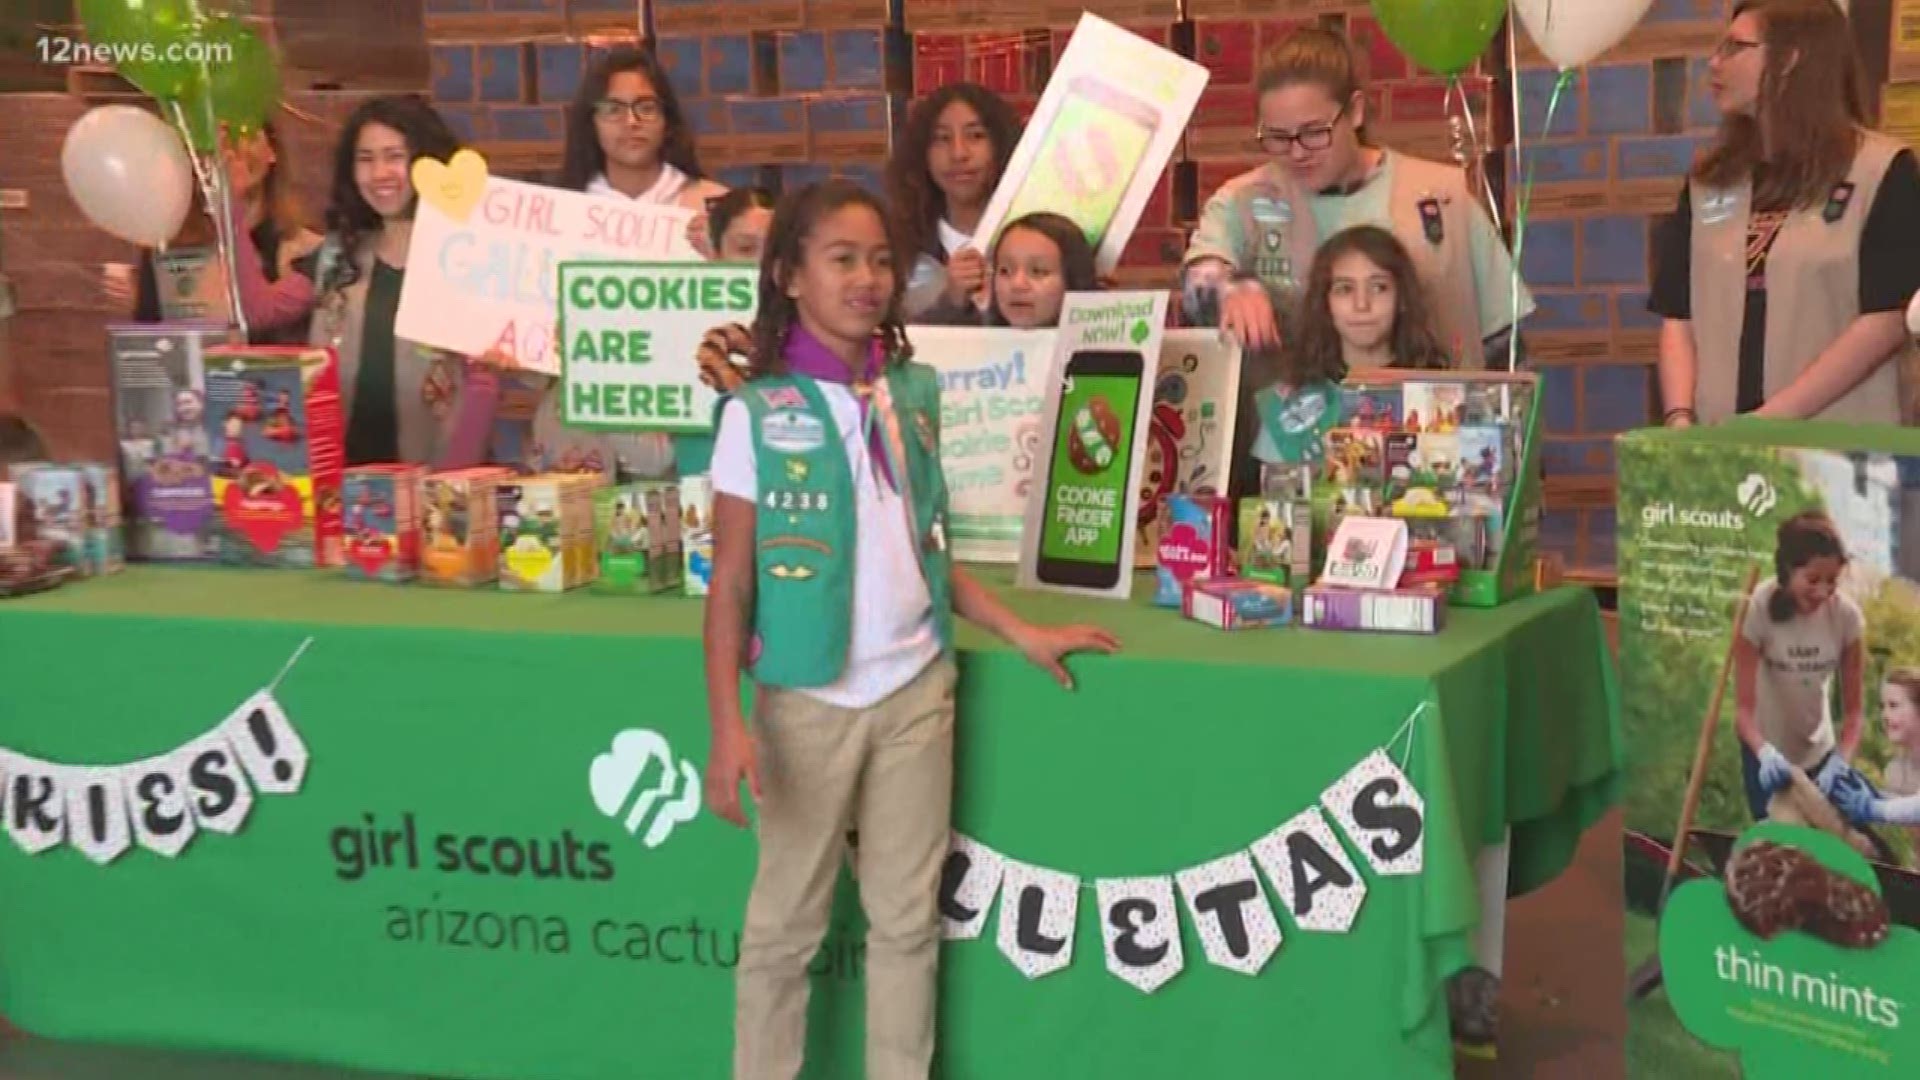 11,000 girls across the state will be selling girl scout cookies for six weeks. What is your favorite cookie?